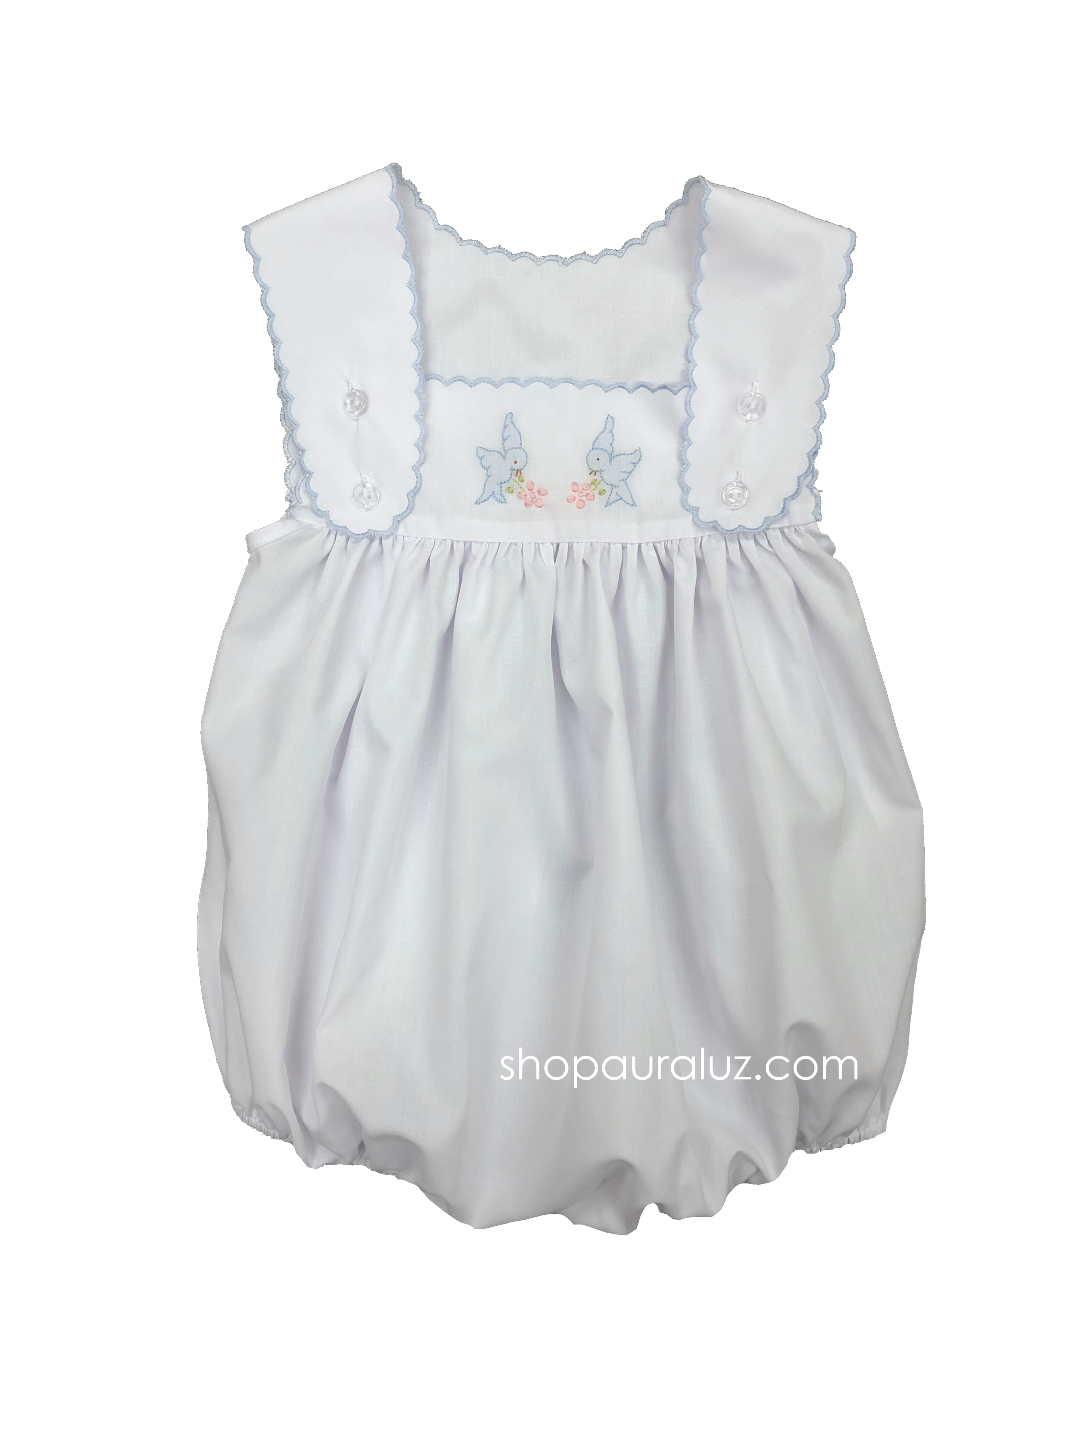 Auraluz Sleeveless Bubble..White with blue scallop trim and embroidered birds